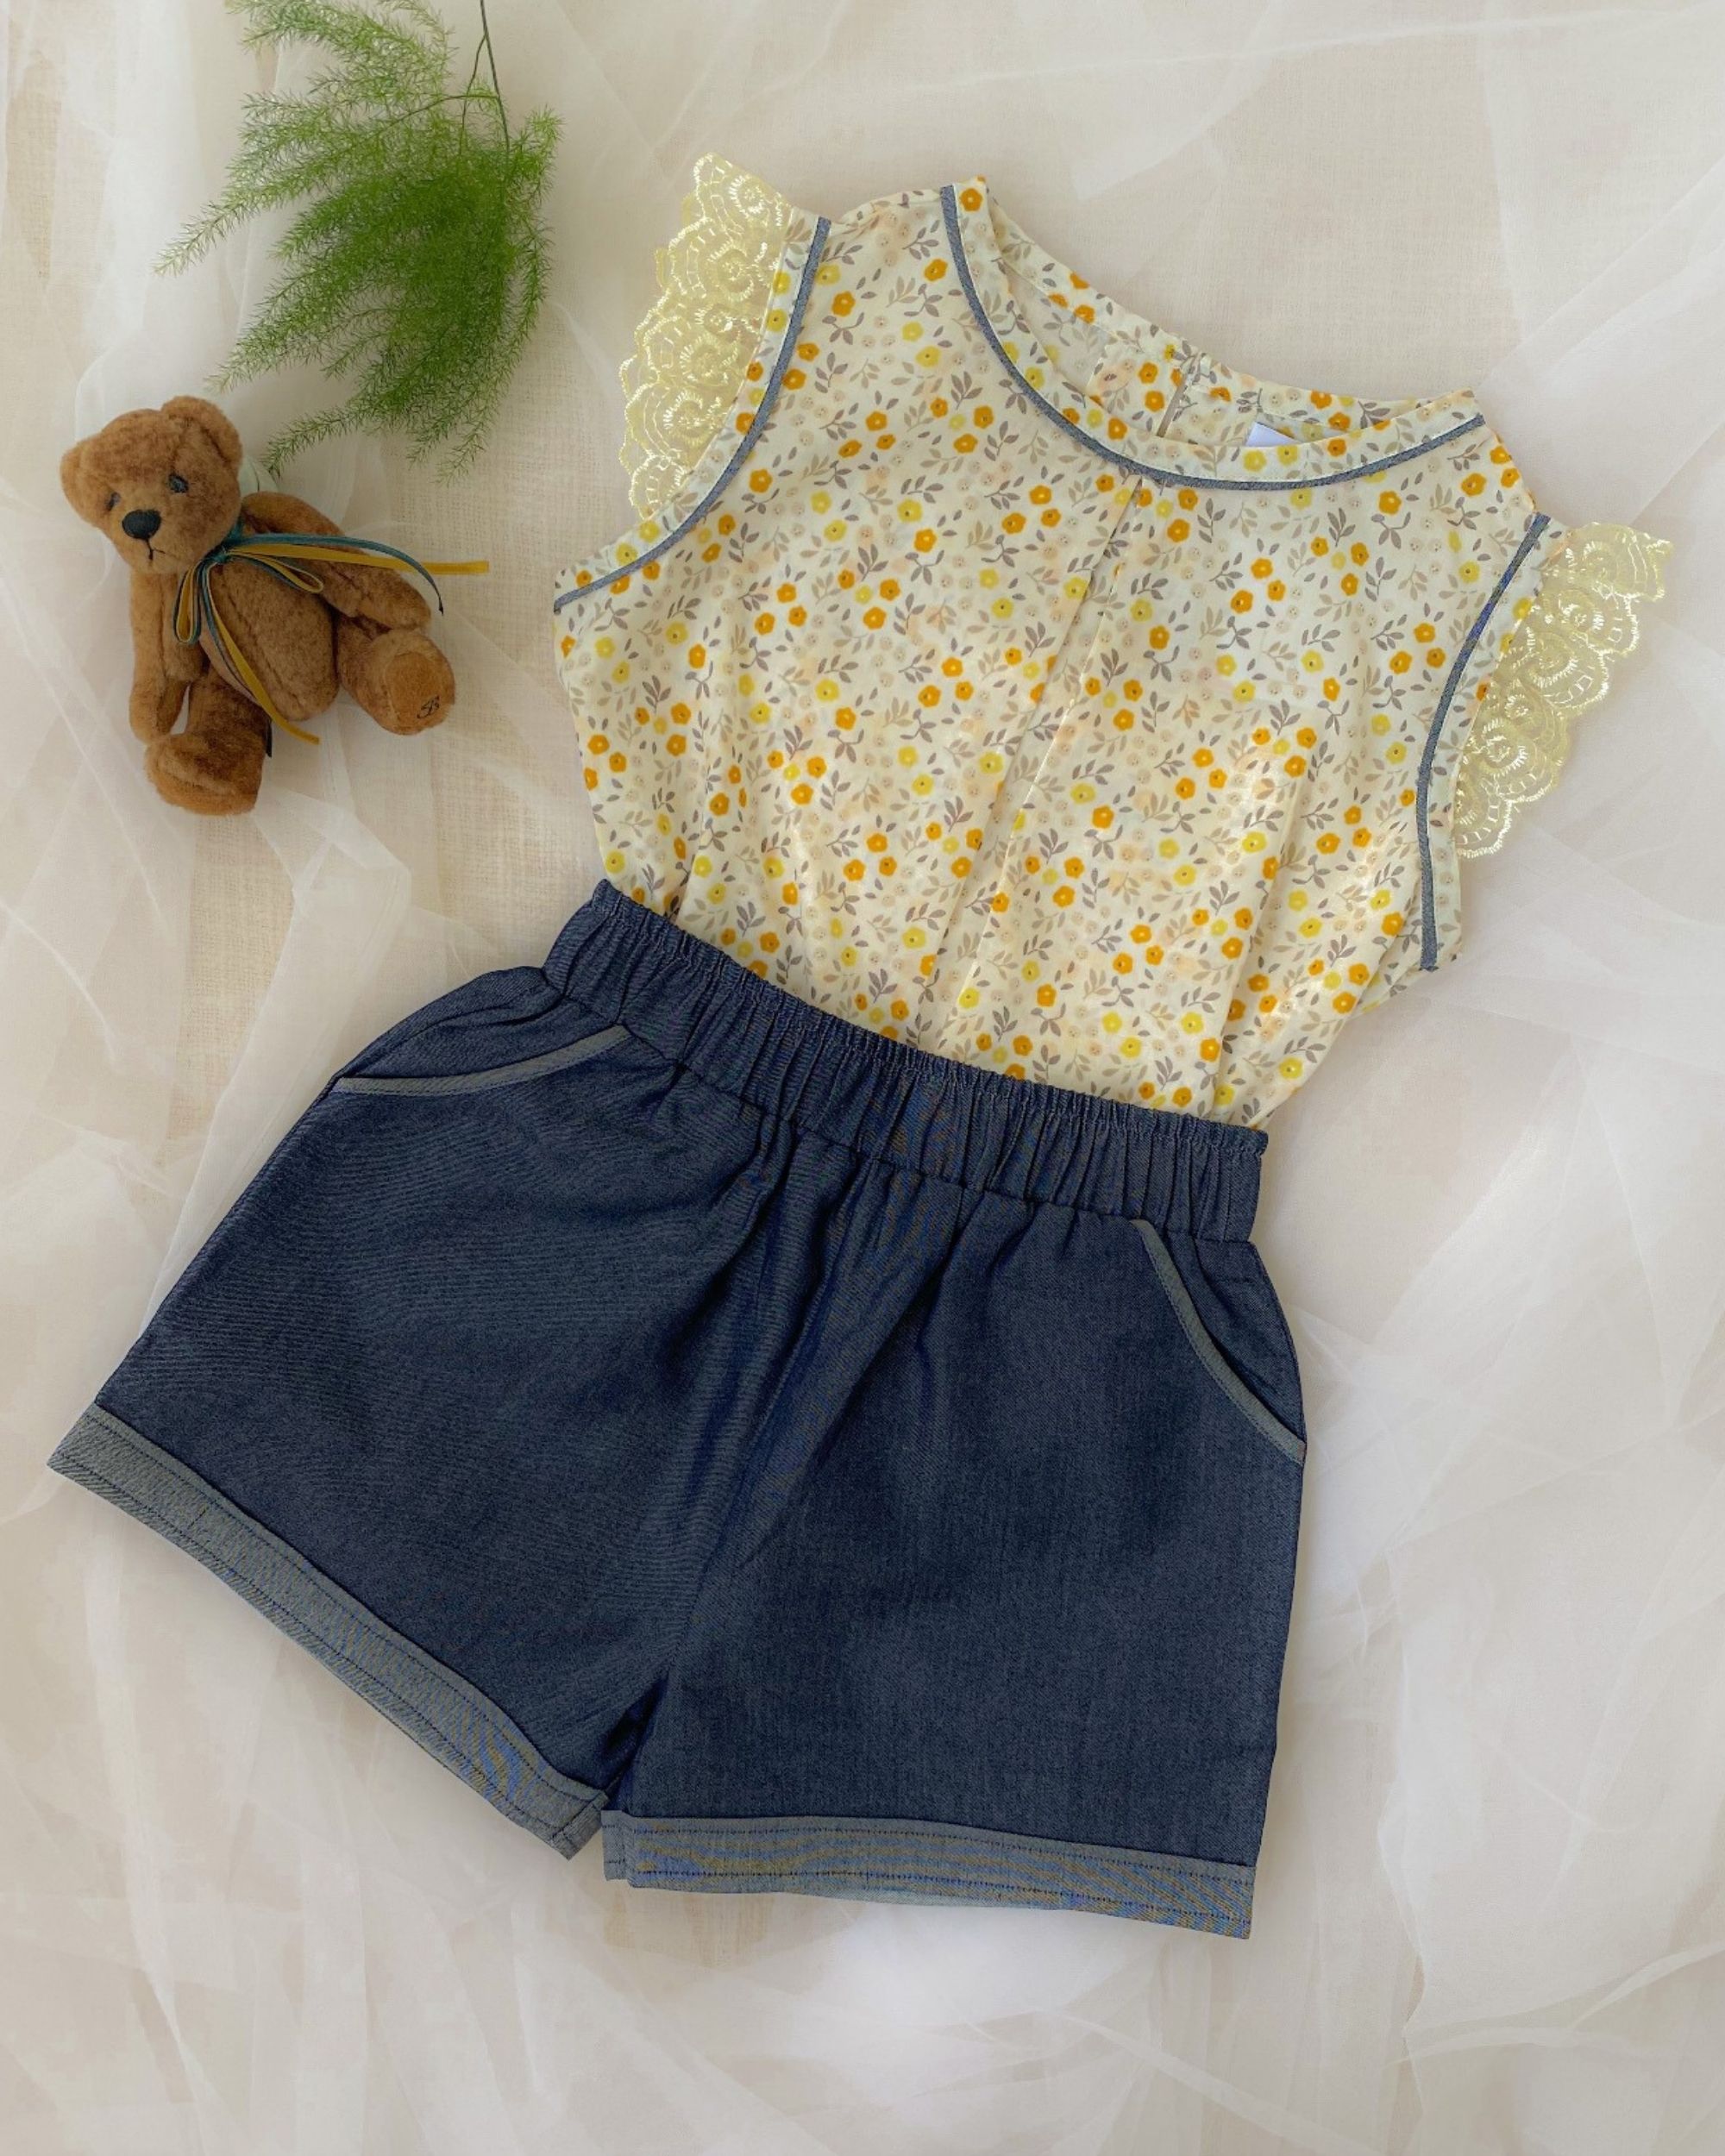 Yellow floral printed lace detailed top with denim shorts - set of two